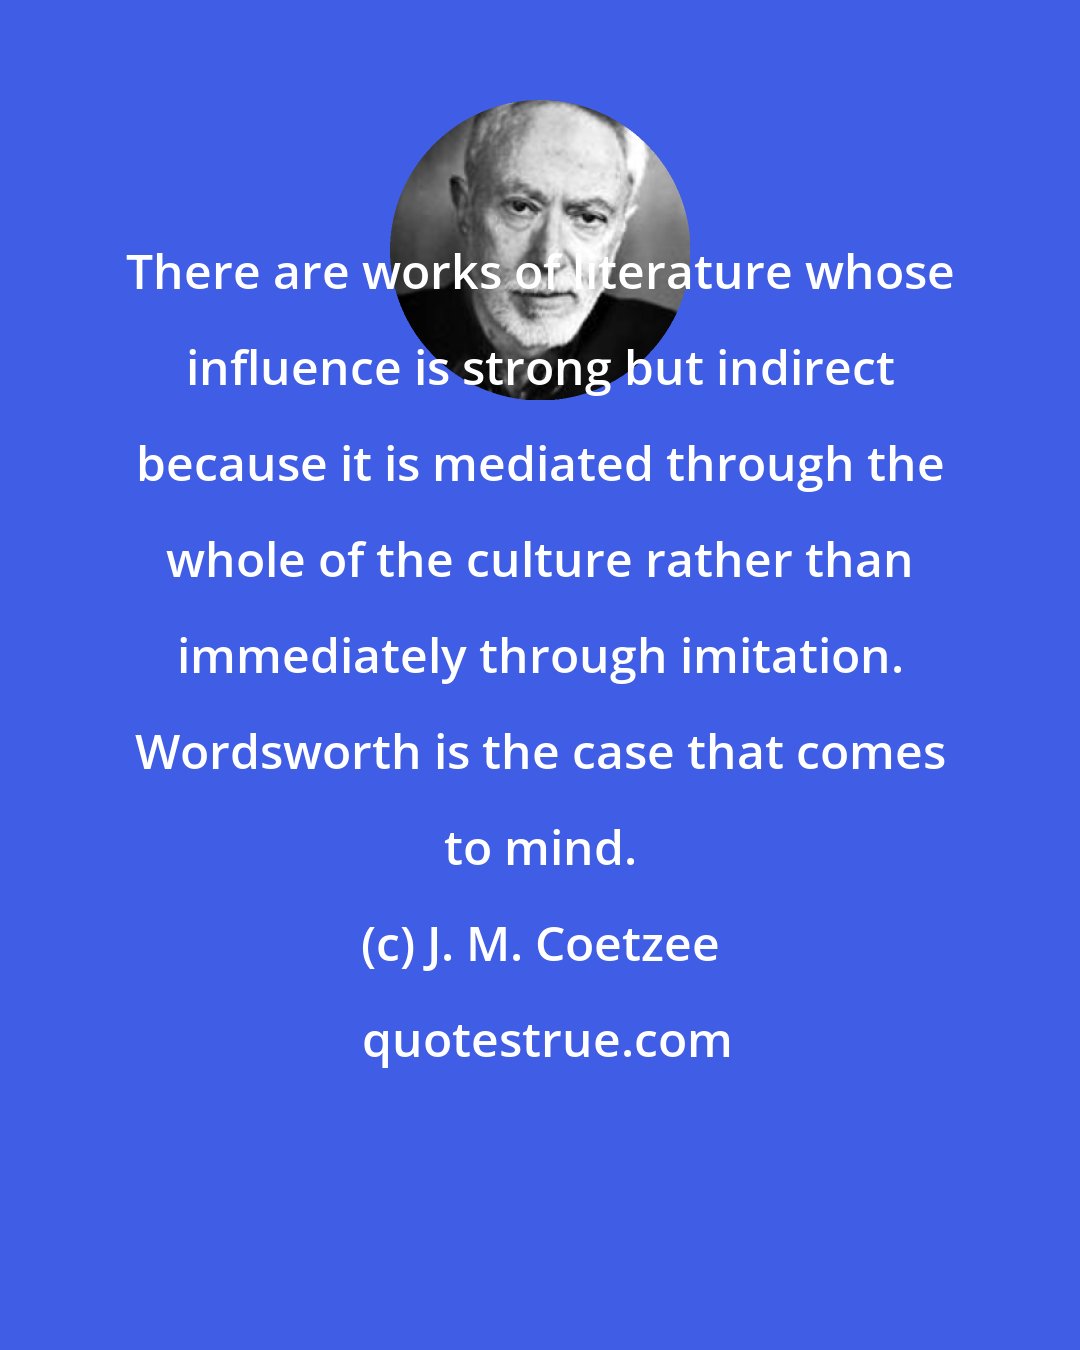 J. M. Coetzee: There are works of literature whose influence is strong but indirect because it is mediated through the whole of the culture rather than immediately through imitation. Wordsworth is the case that comes to mind.